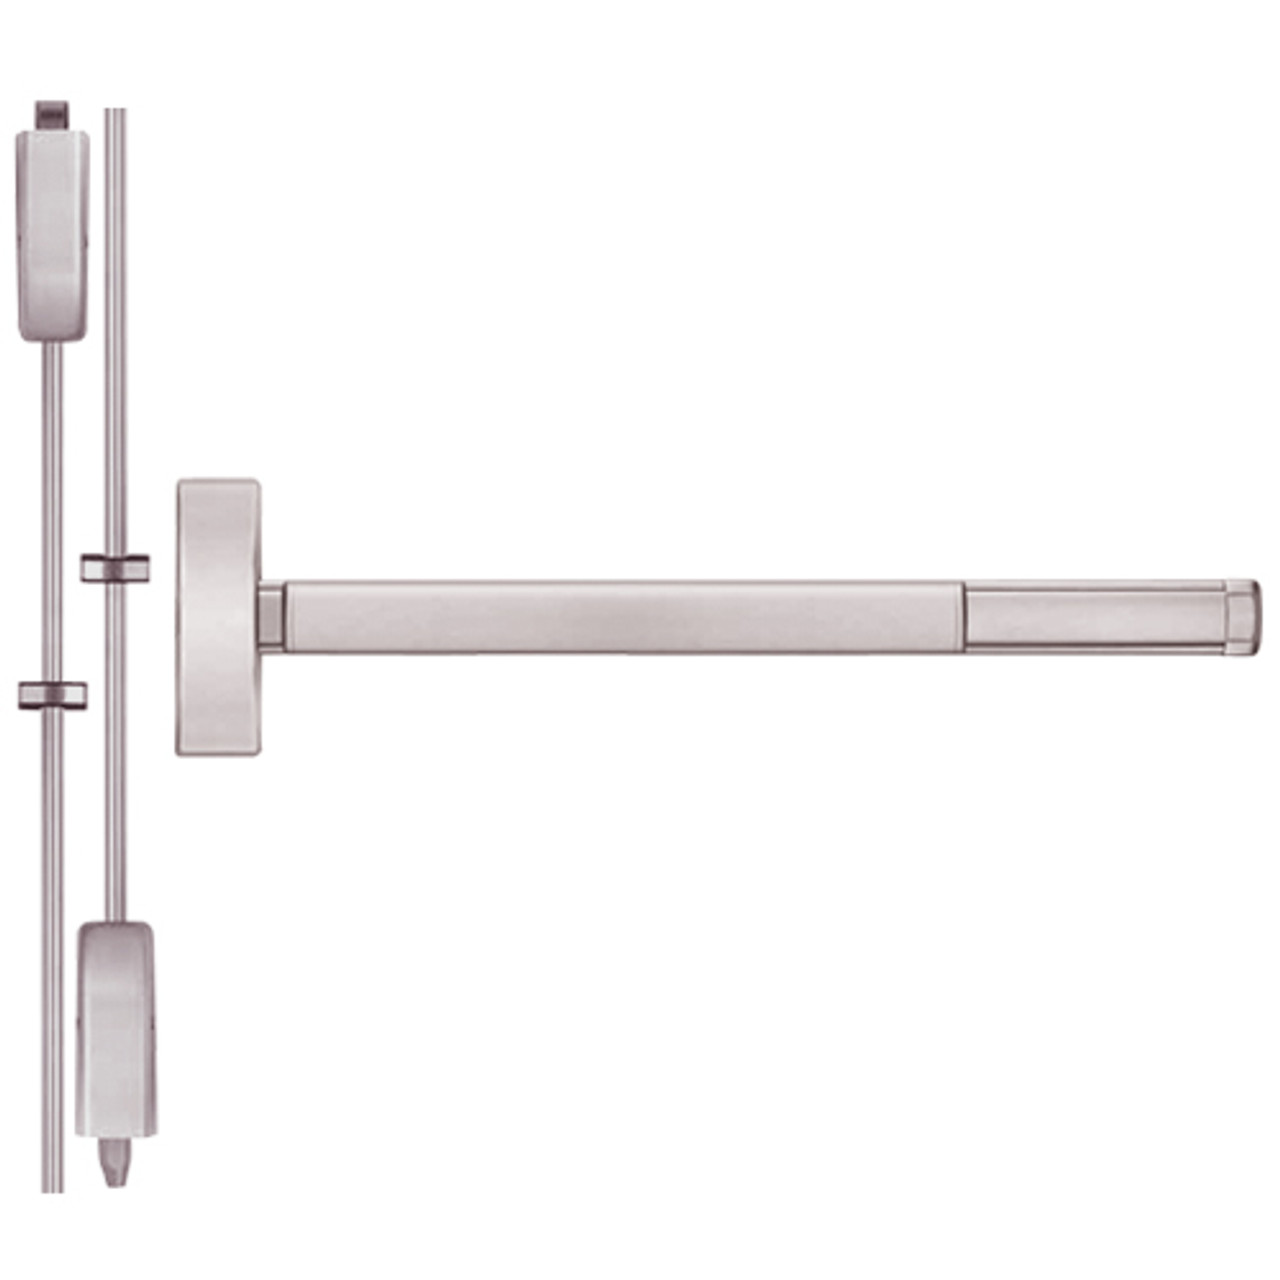 DEFL2208LBR-628-36 PHI 2200 Series Fire Rated Apex Surface Vertical Rod Device with Delayed Egress Prepped for Key Controls Lever/Knob in Satin Aluminum Finish